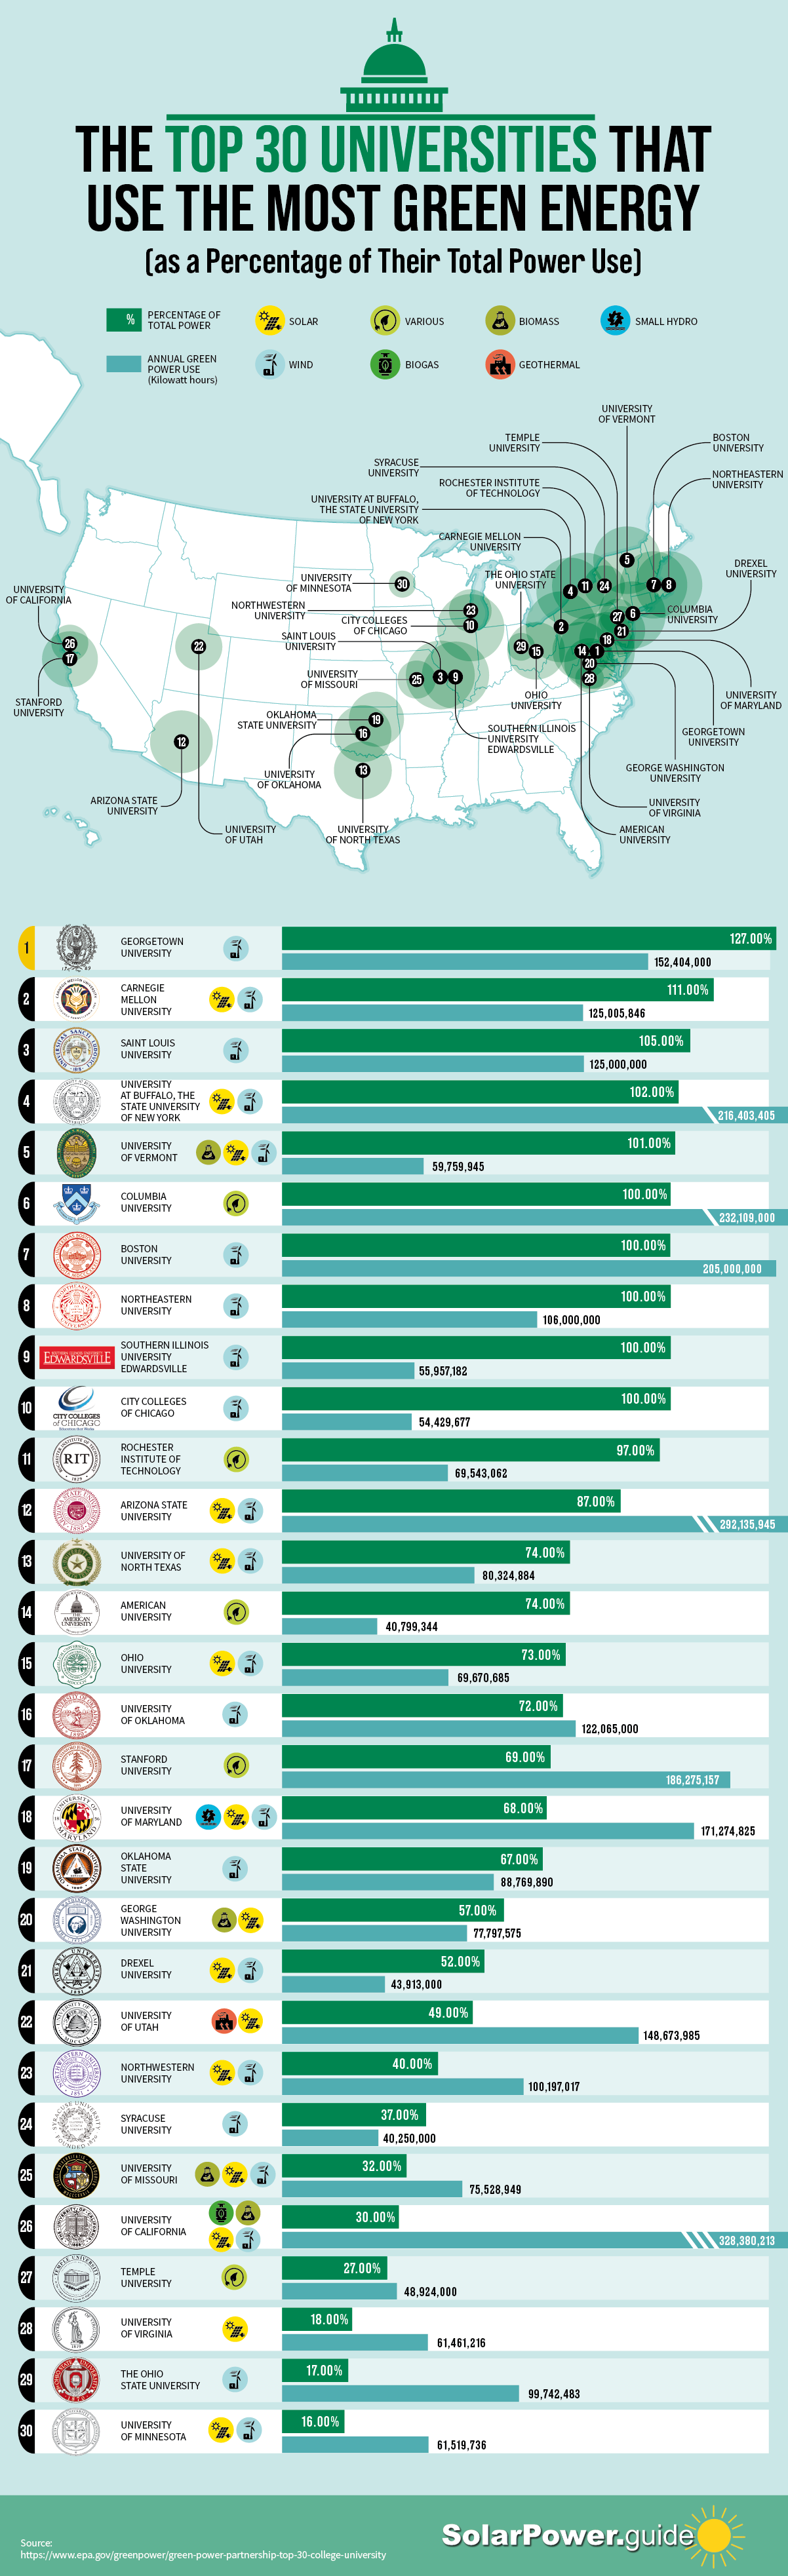 The Top 30 Universities That Use the Most Green Energy as a Percentage of Their Total Power Use - Solar Power Guide - Infographic